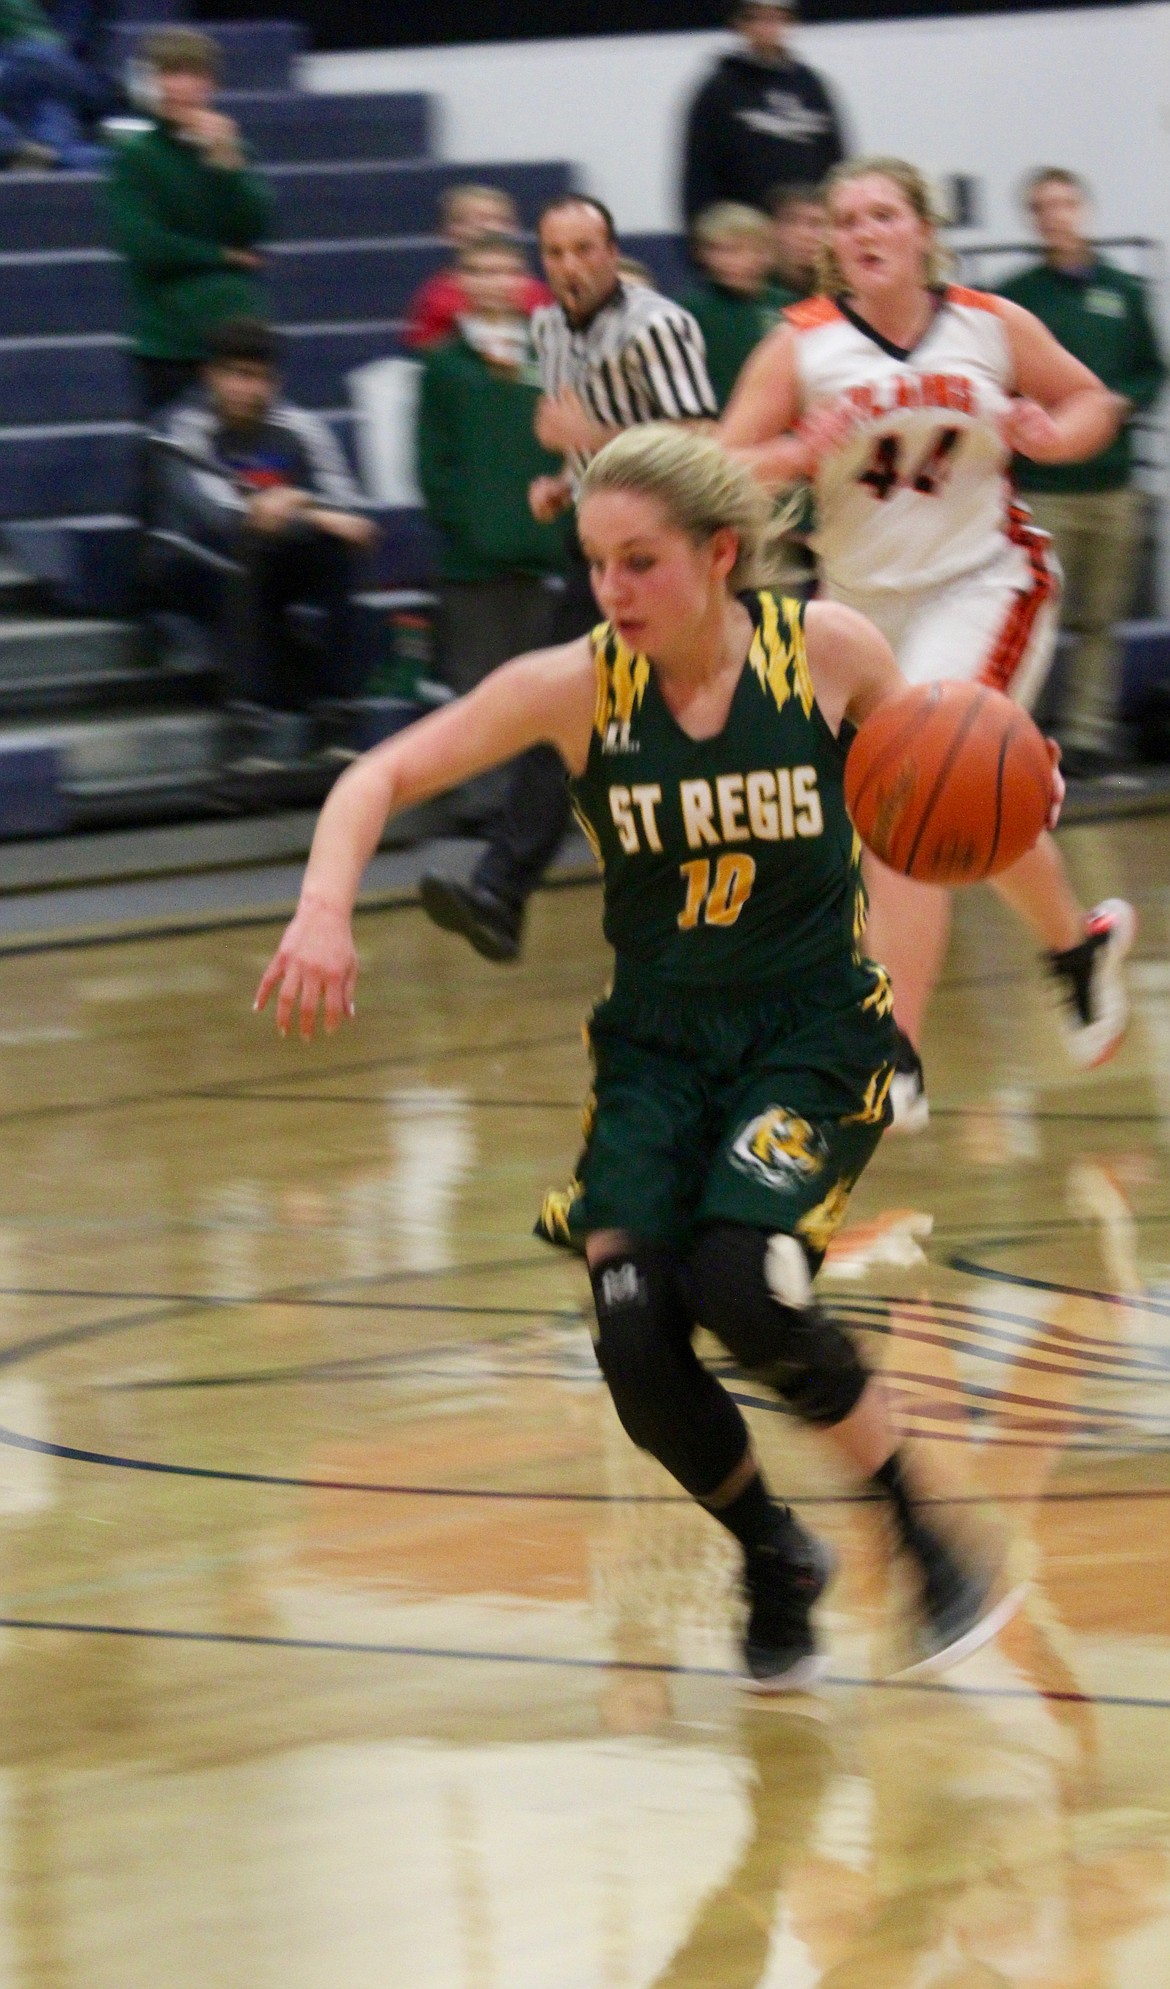 Senior Madison Hill had a game high of 26 points against Plains during St. Regis&#146; Jan. 5 basketball matchup. St. Regis lost 45-43. (Douglas Wilks/Valley Press).